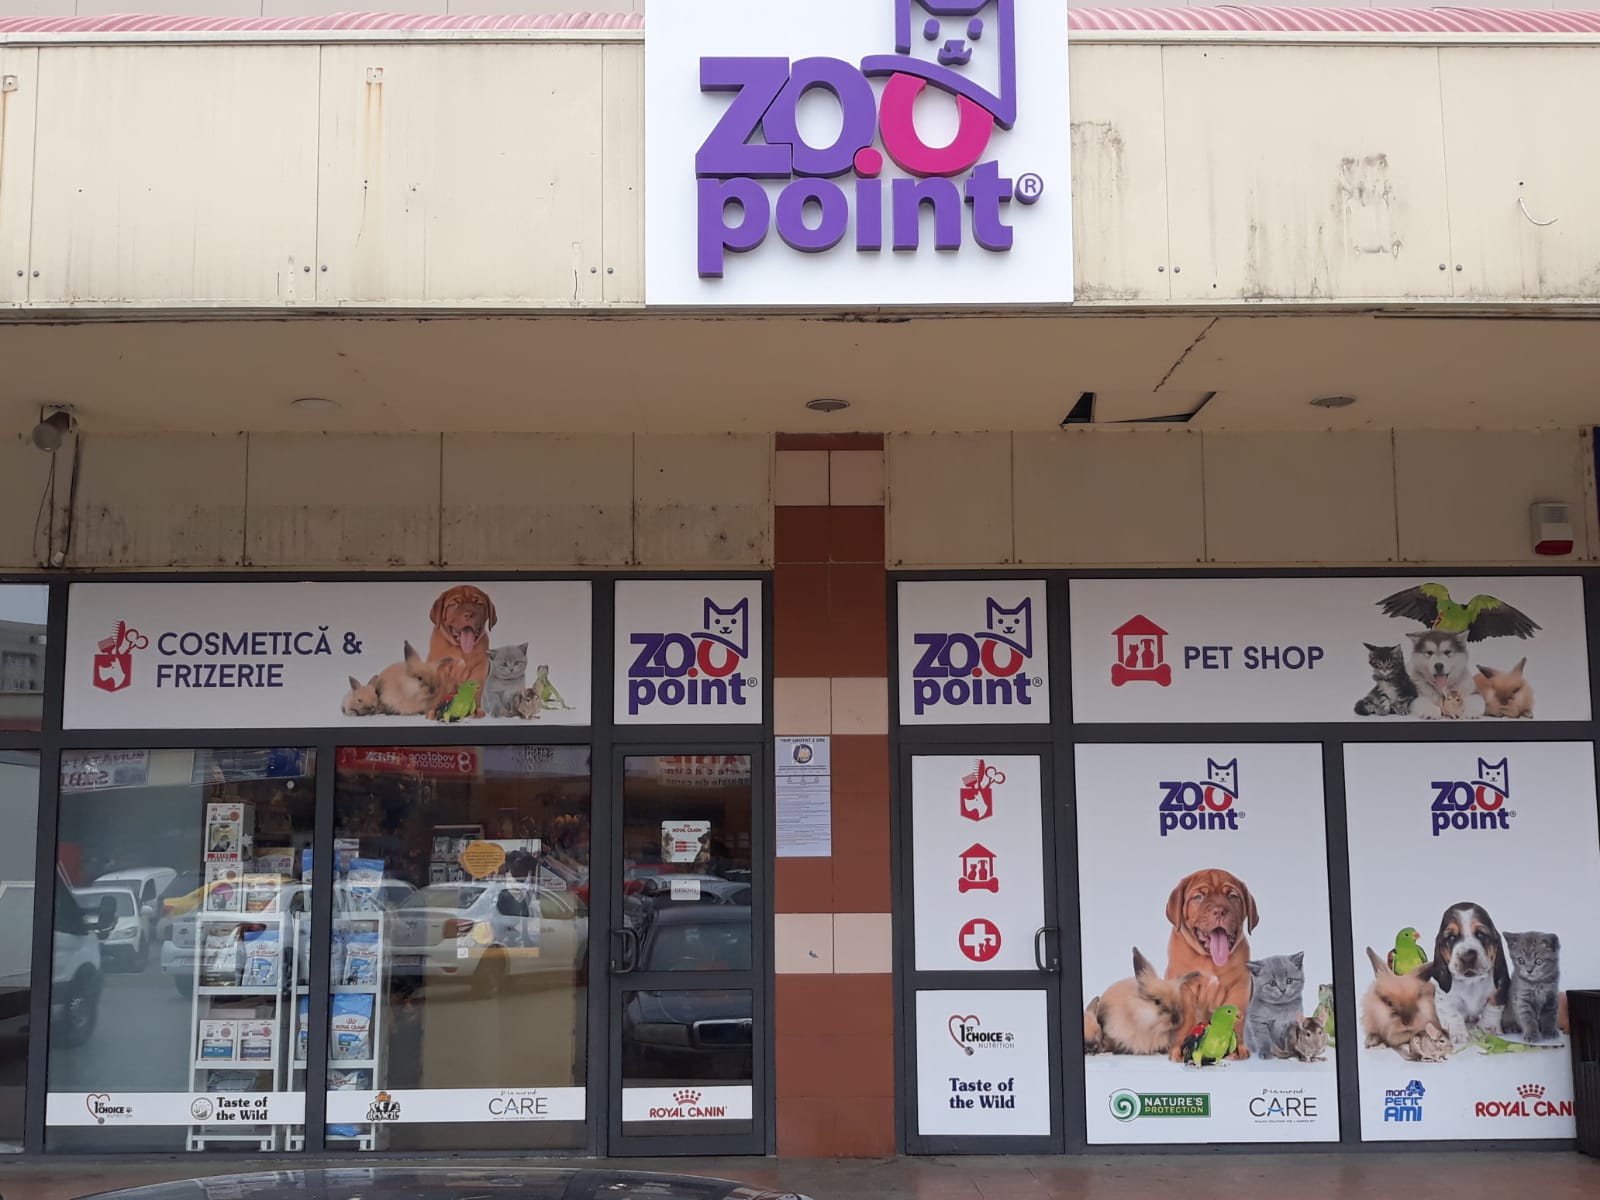 ZooPoint (Nasaud Shopping Center)